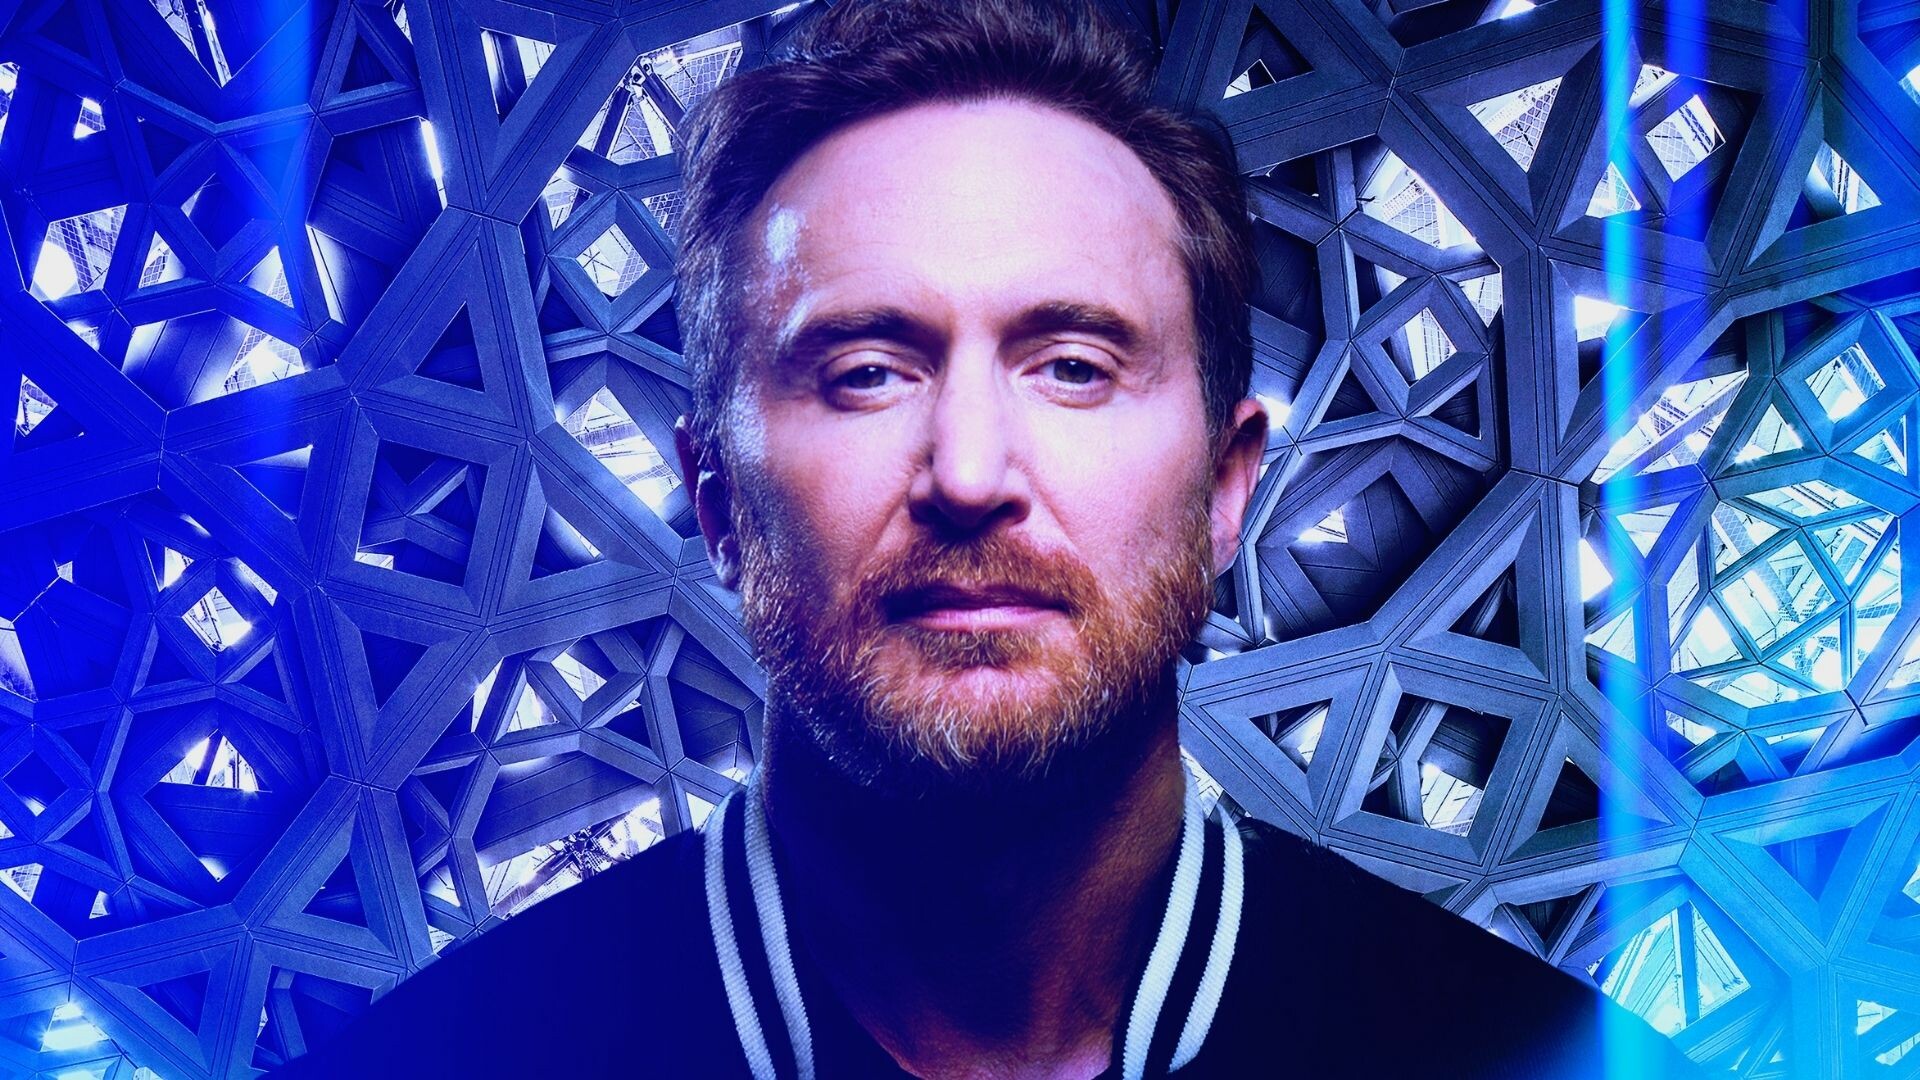 David Guetta: The French DJ who started out playing tunes in a Paris nightclub back in the 90s. 1920x1080 Full HD Wallpaper.